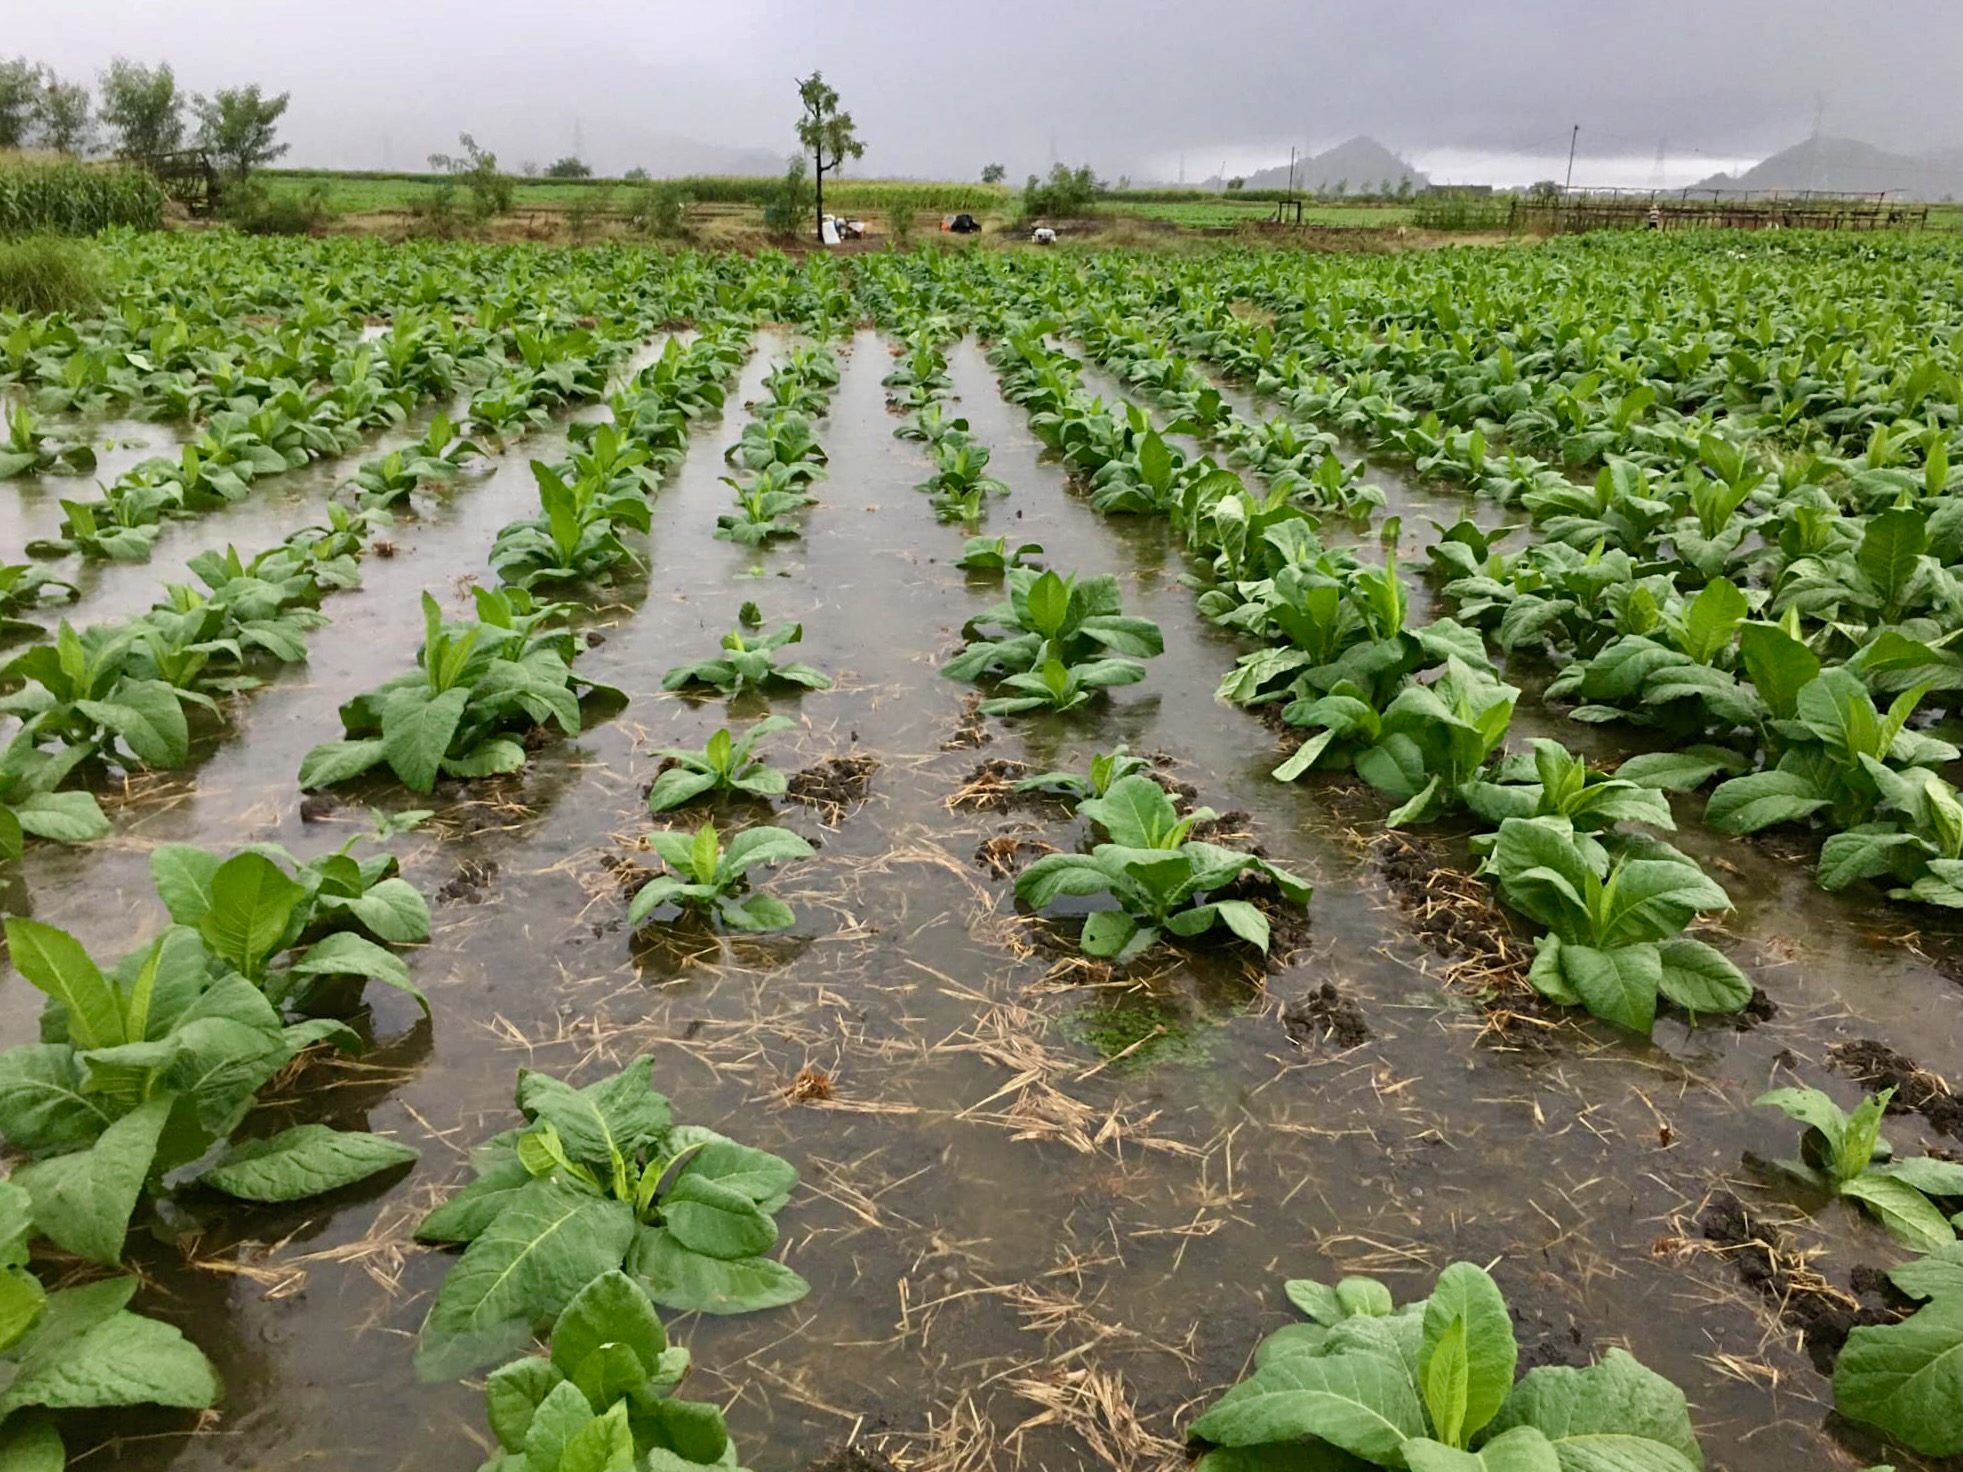 Ilocos farmers appeal for aid after rains flood tobacco fields